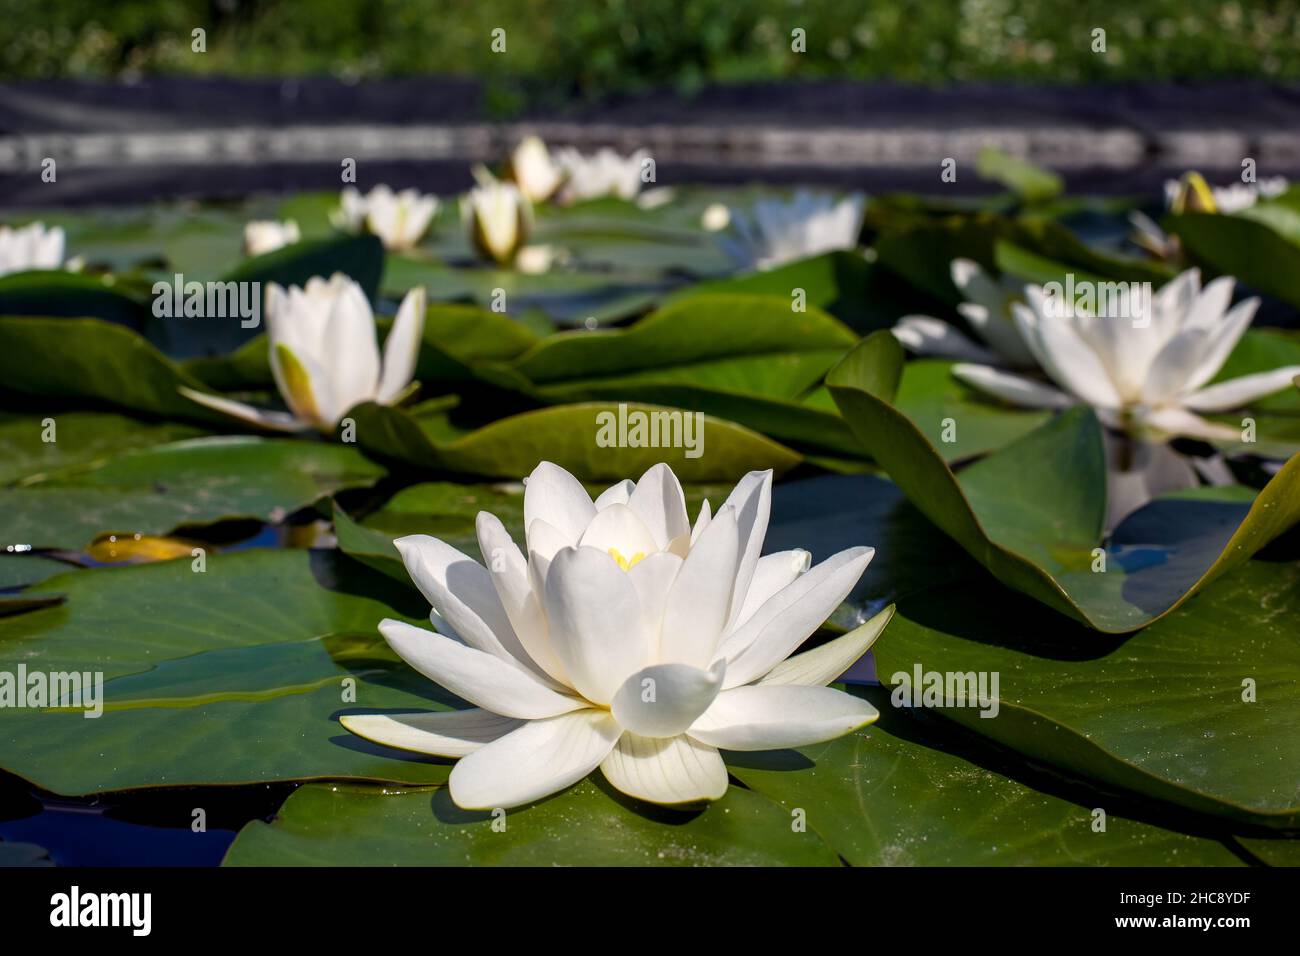 water lilies green leaves on a pond with white blooming lotus flowers lit by sunlight summer light, close-up river lily bud petals on the water surfac Stock Photo